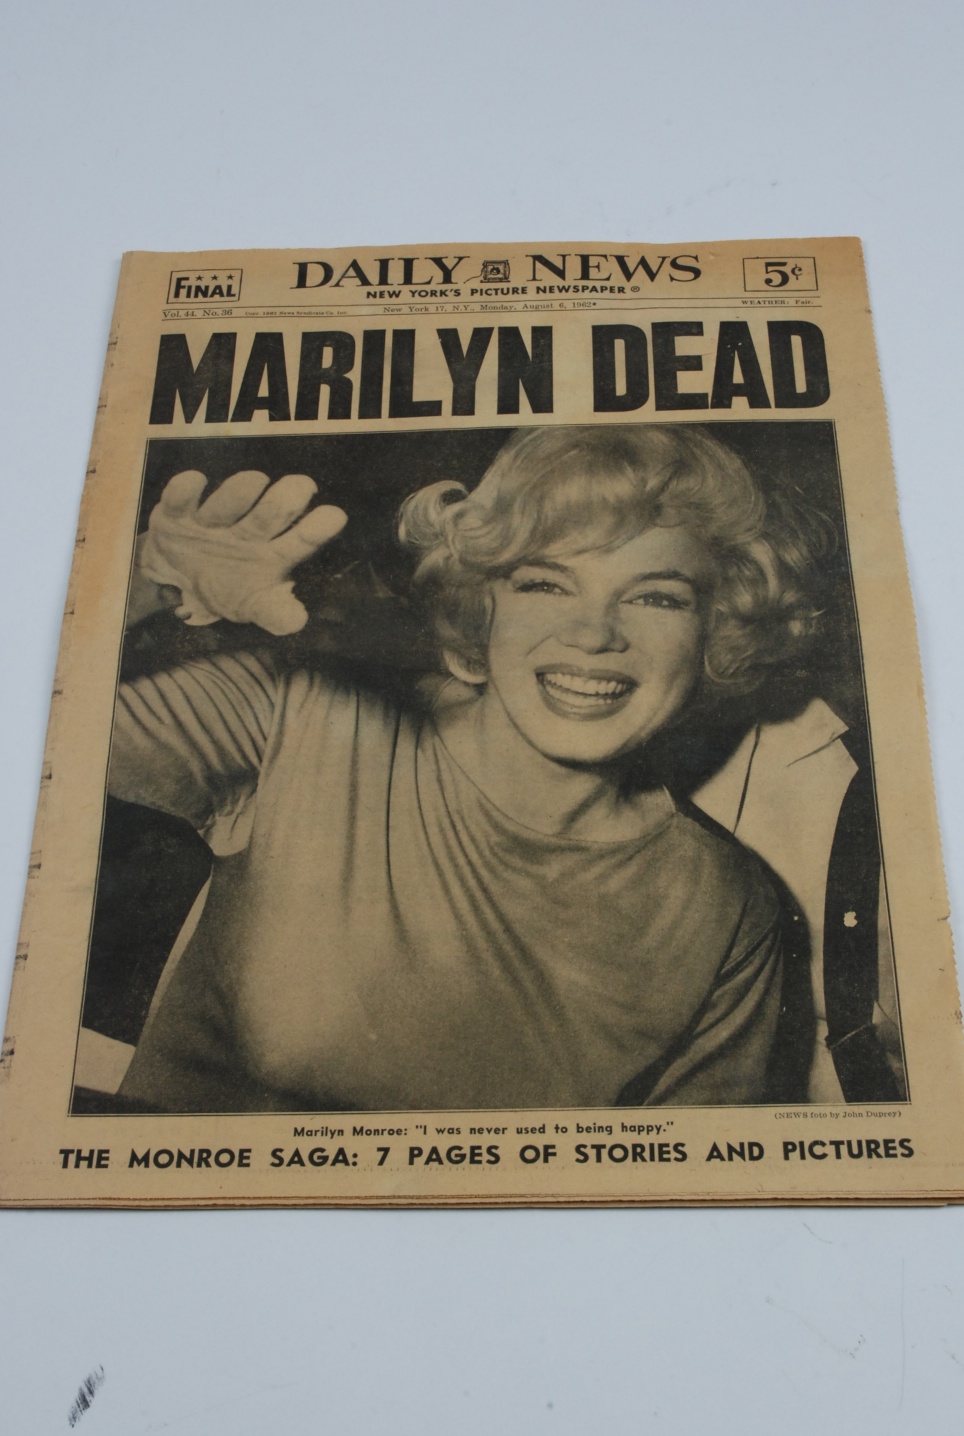 Lot - NEWSPAPER REPORTS THE DEATH OF MARILYN MONROE